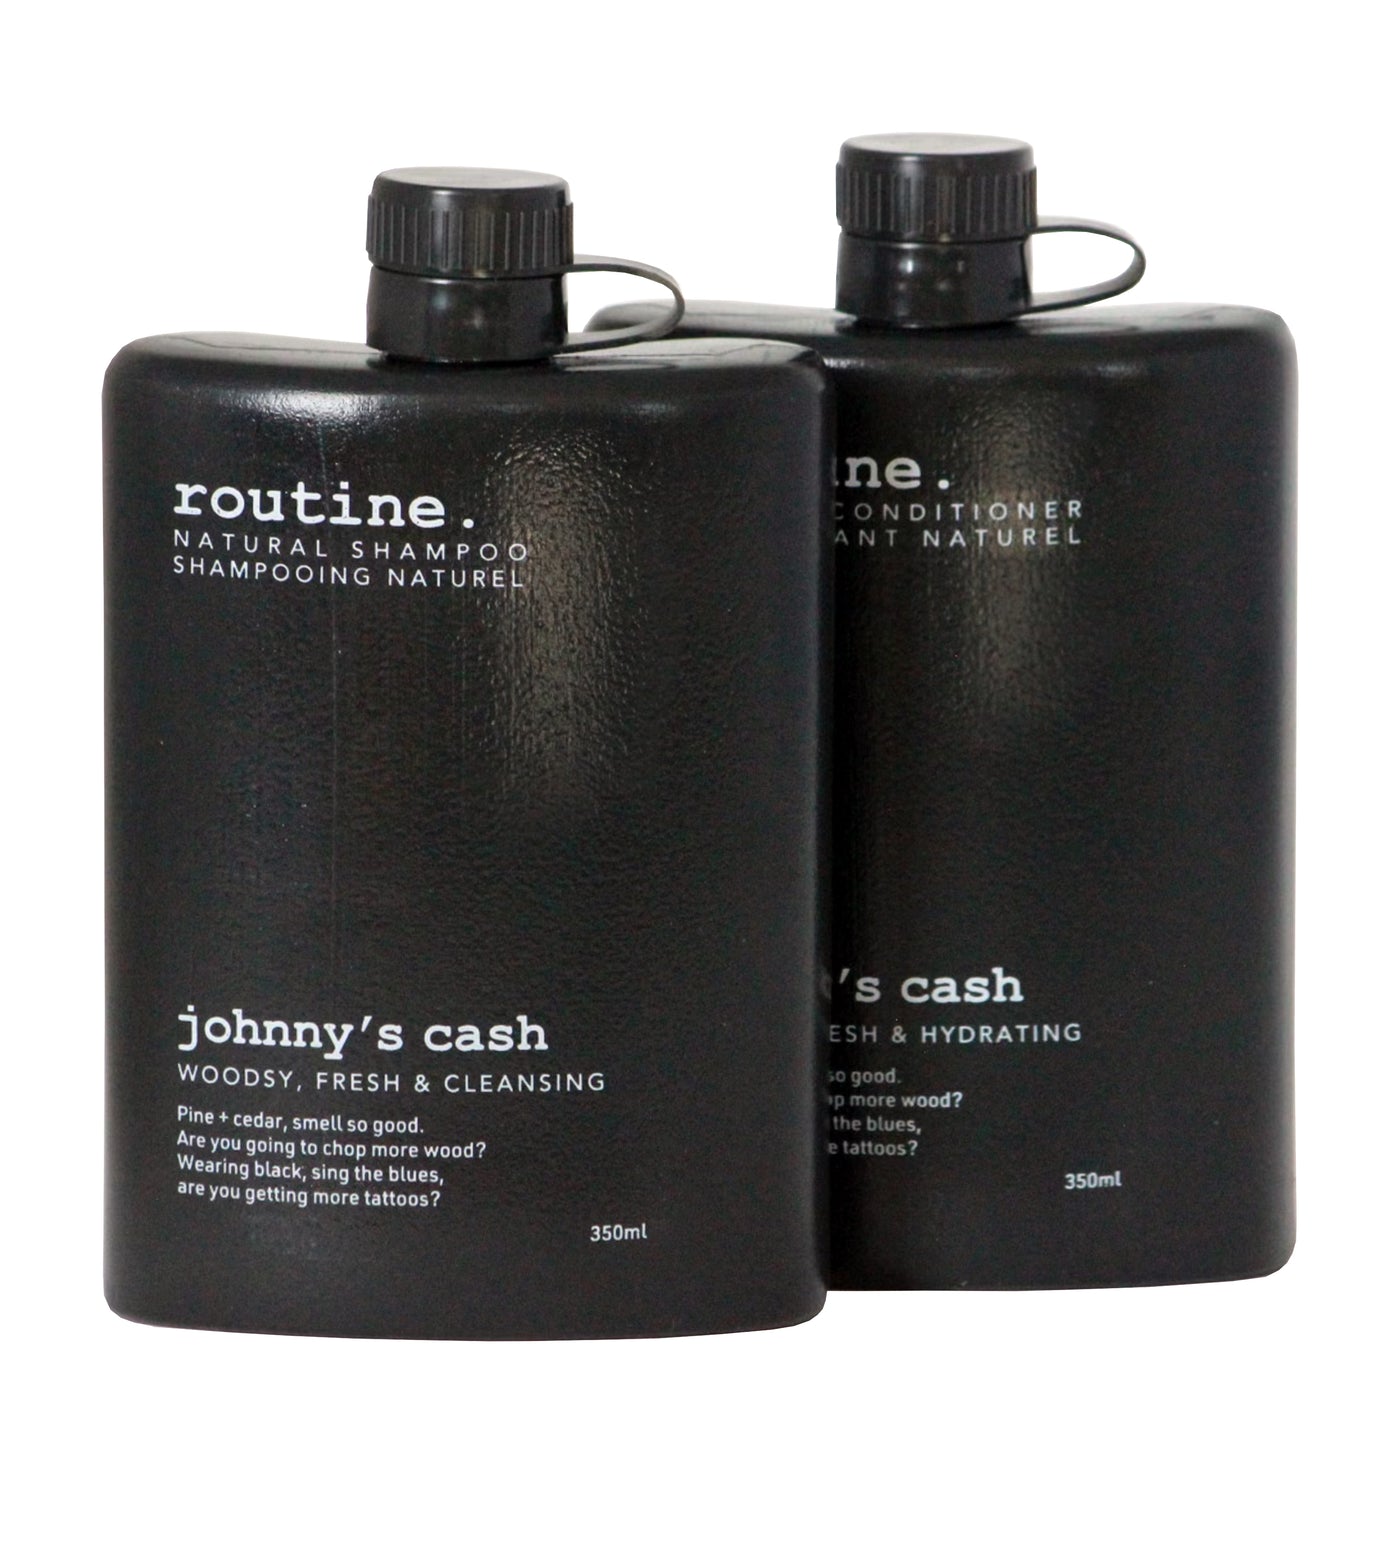 Hair System Sets Natural Shampoo and Conditioner -Routine Cream